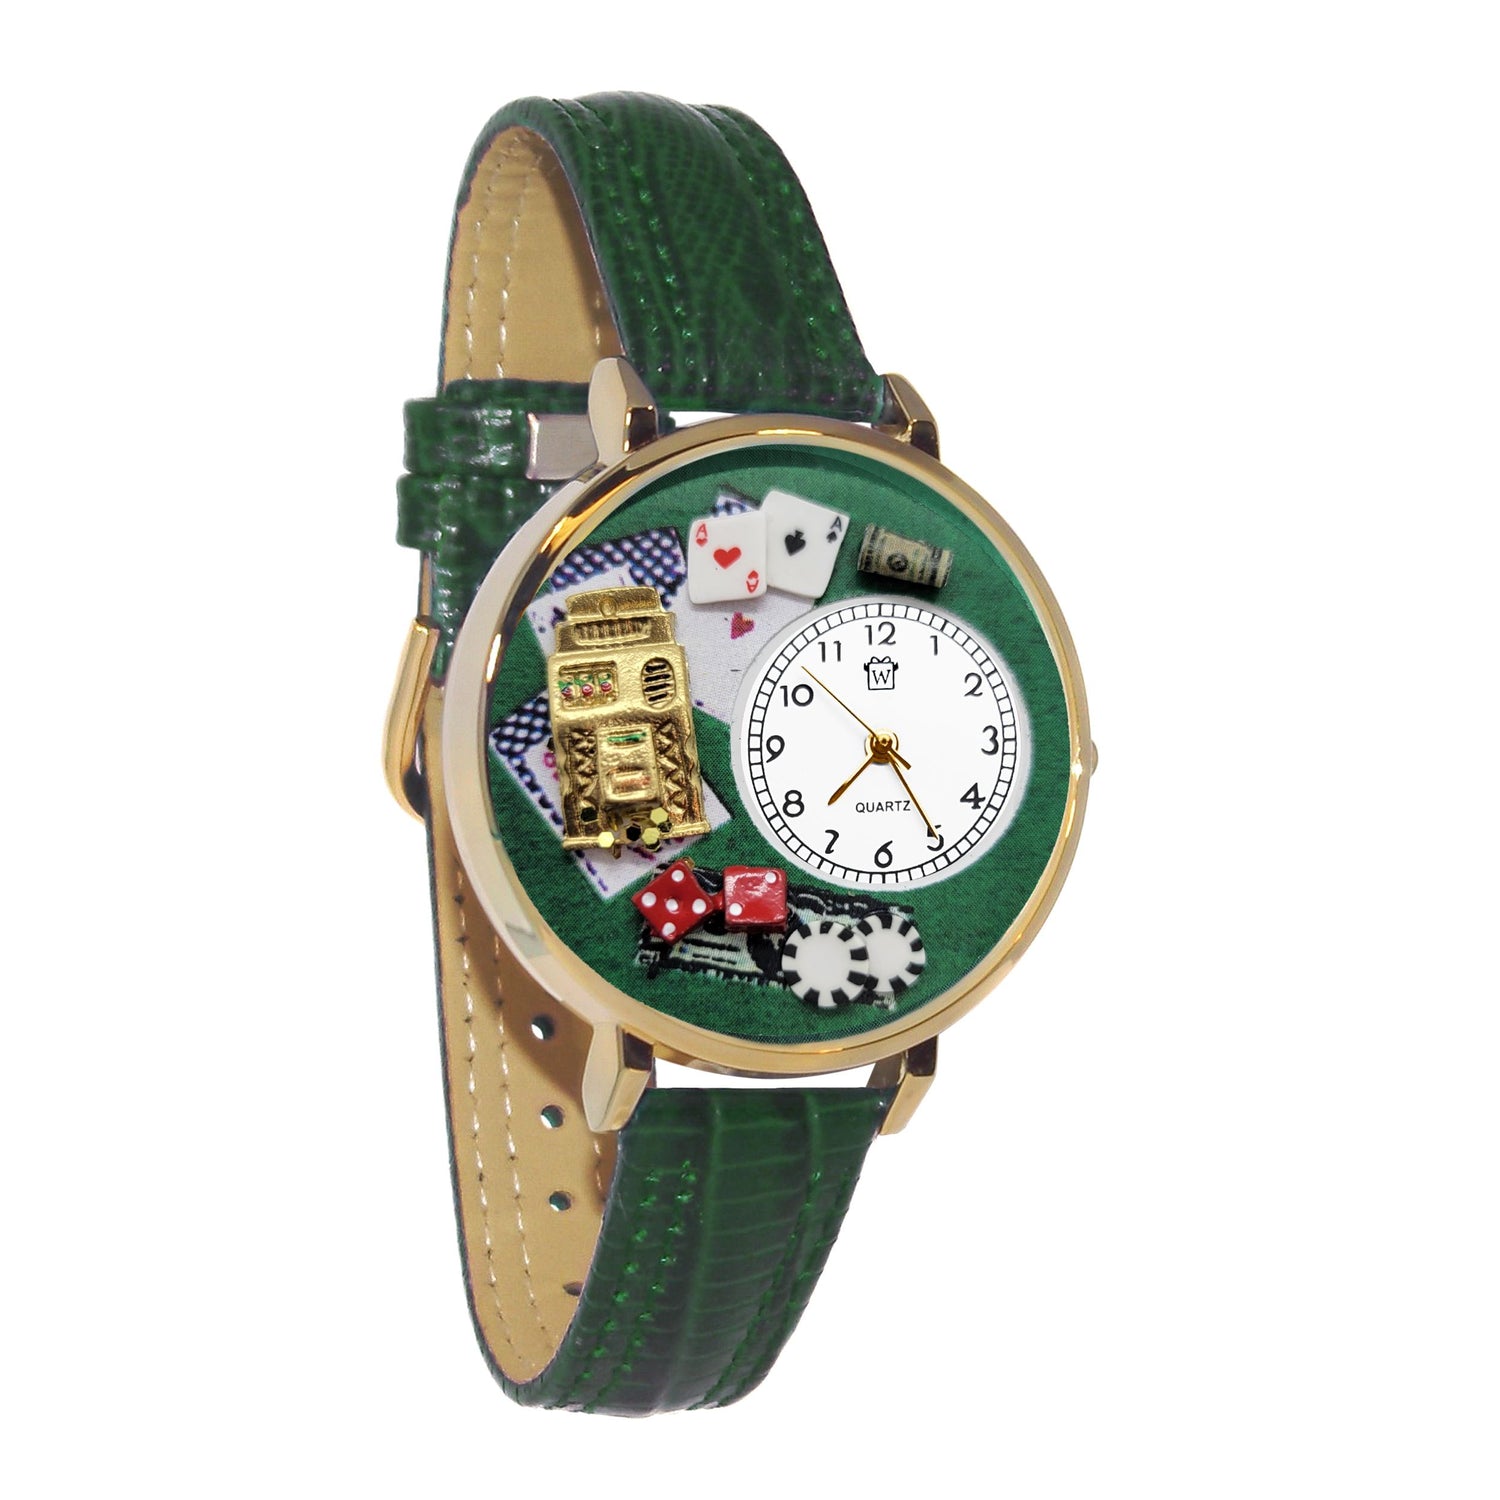 Whimsical Gifts | Casino Slot Machine 3D Watch Large Style | Handmade in USA | Hobbies & Special Interests | Casino & Gaming | Novelty Unique Fun Miniatures Gift | Gold Finish Green Leather Watch Band